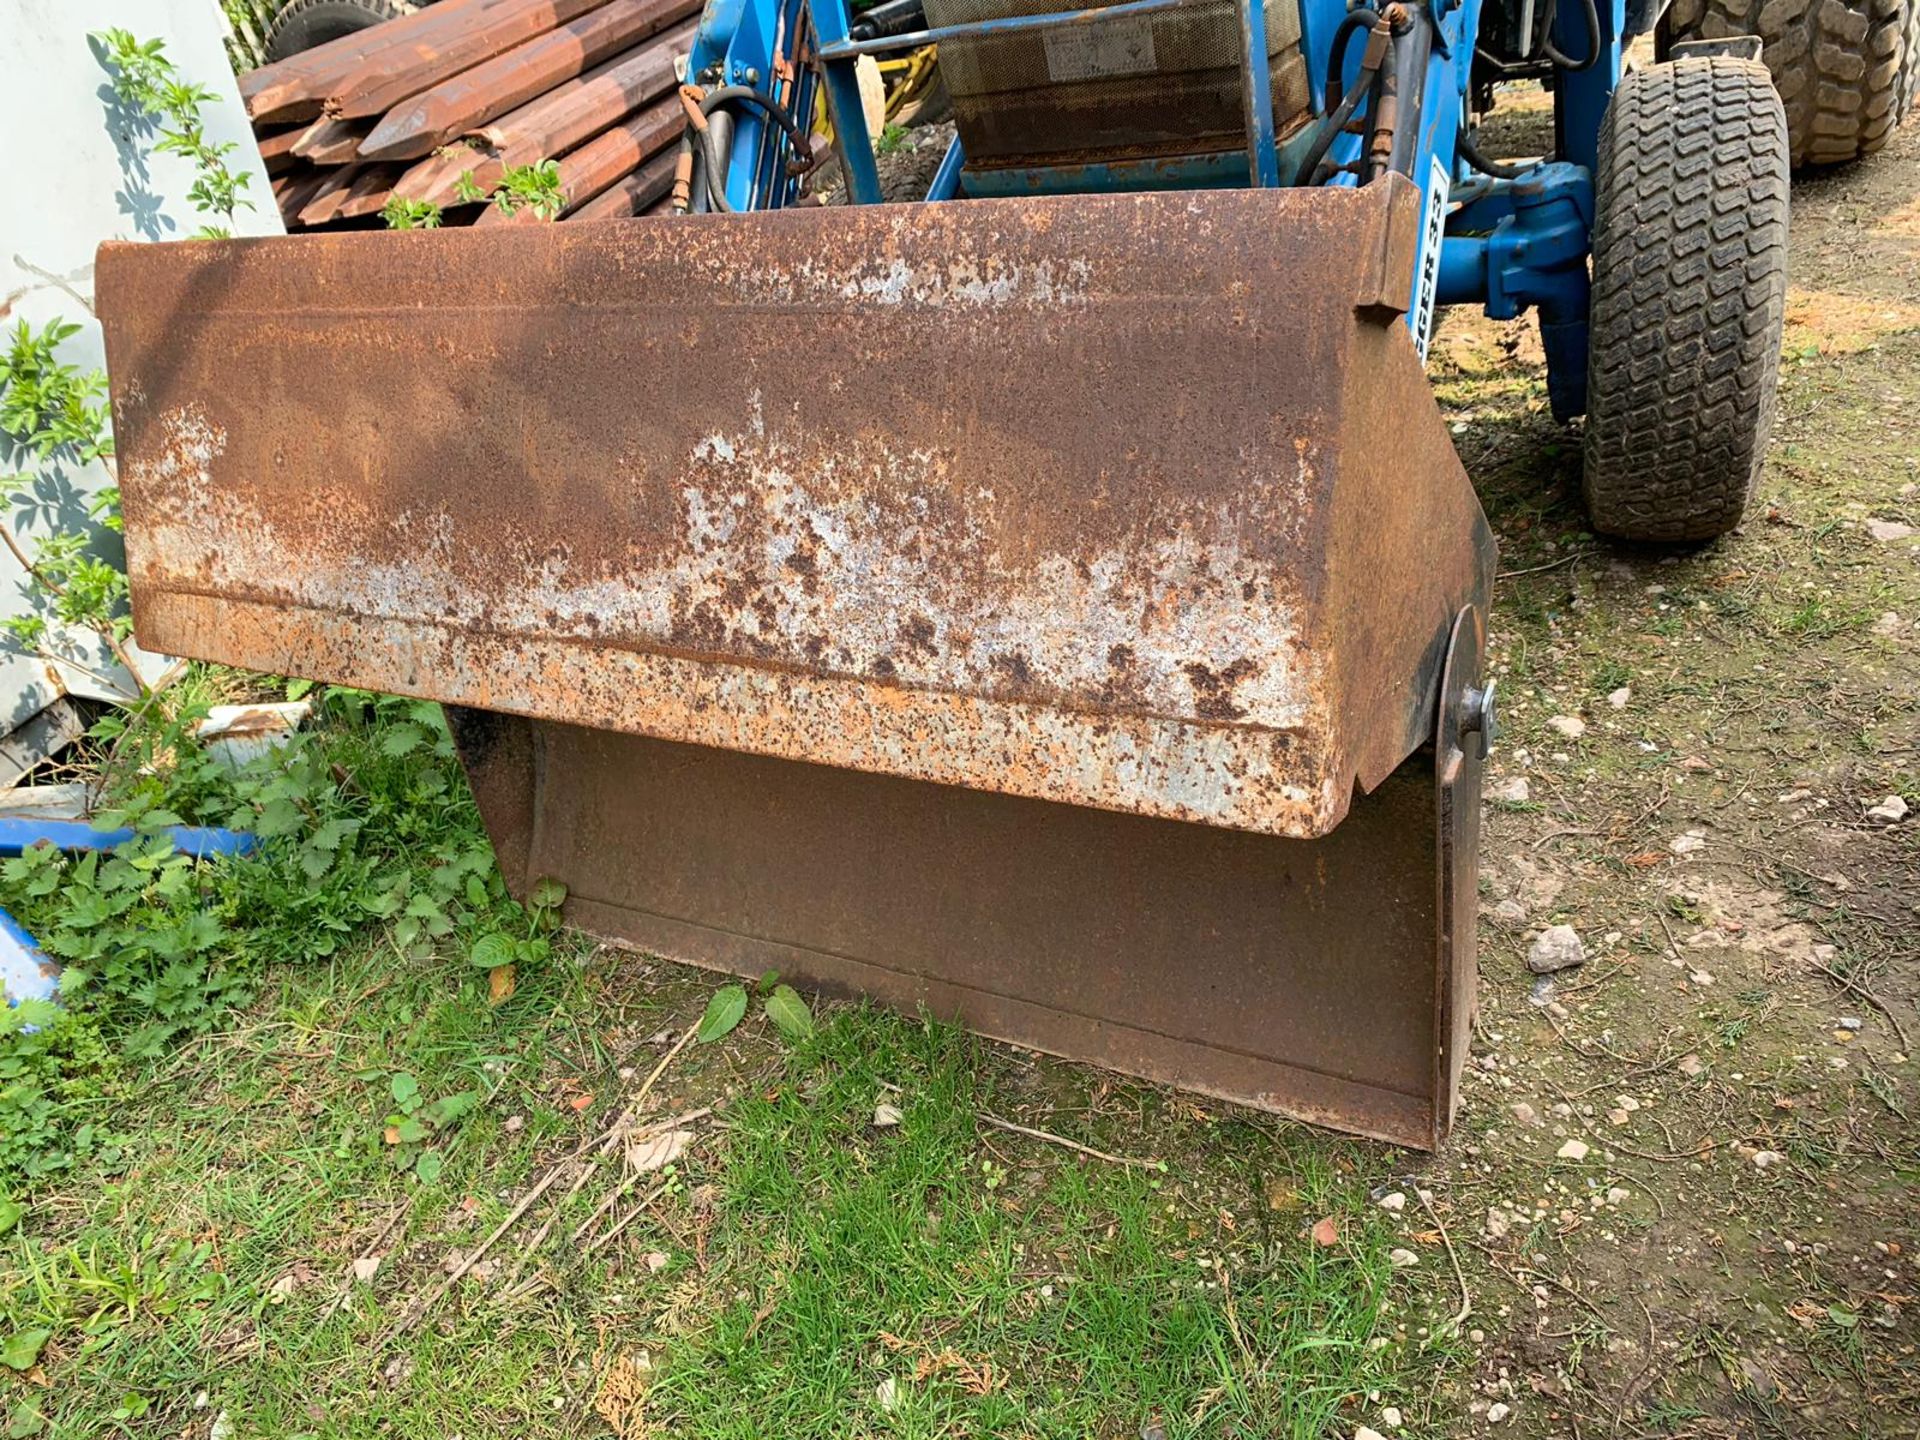 FORD 1920 BLUE COMPACT UTILITY TRACTOR C/W LEWIS LANDLUGGER 33 FRONT LOADER ATTACHMENT BUCKET - Image 3 of 12